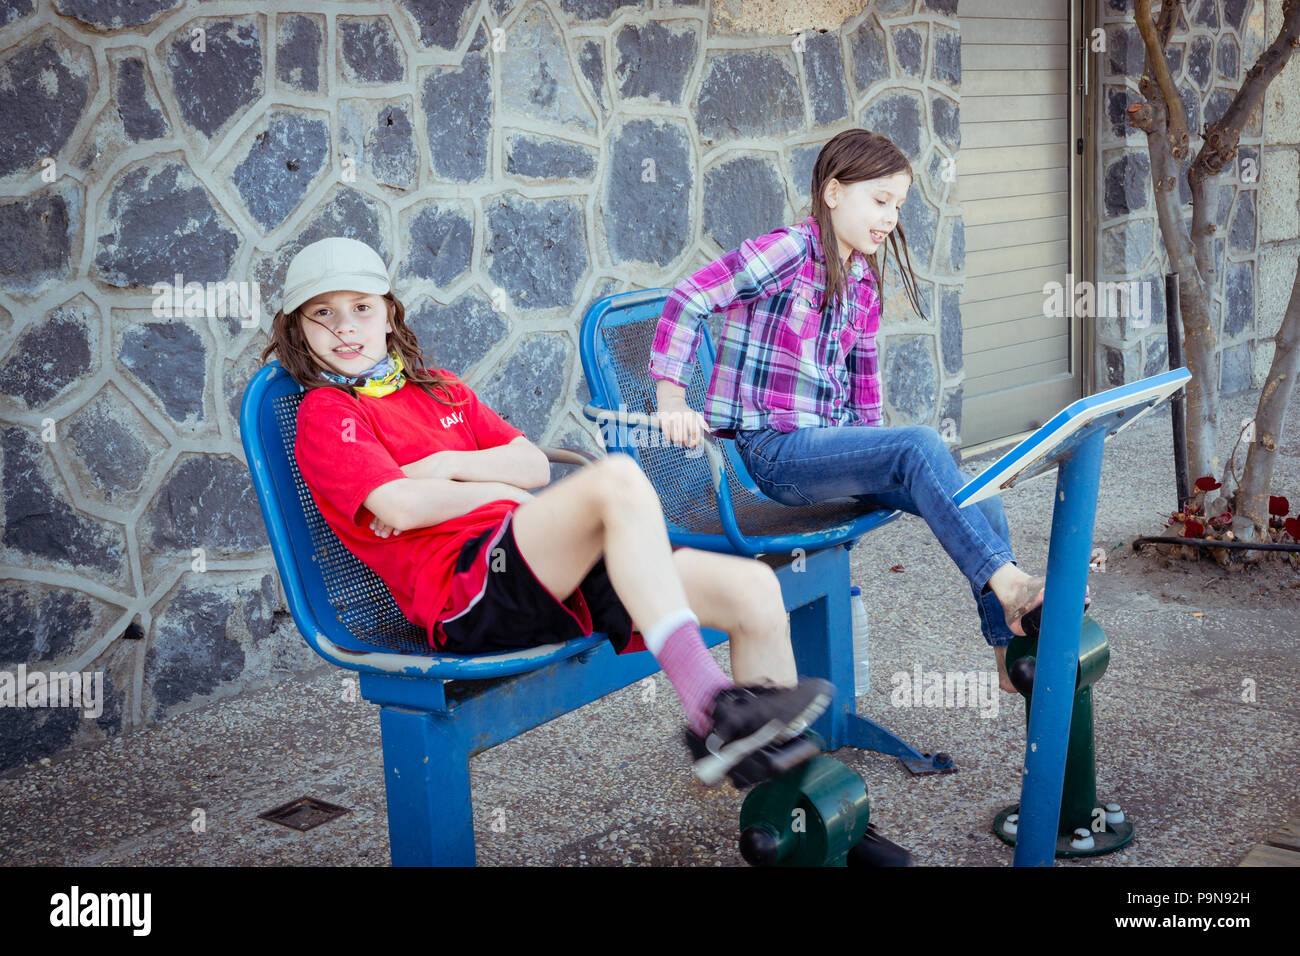 Two caucasian girls children exercising using adult sized outdoor gym equipment, bike pedals with seats, on public street. Stock Photo